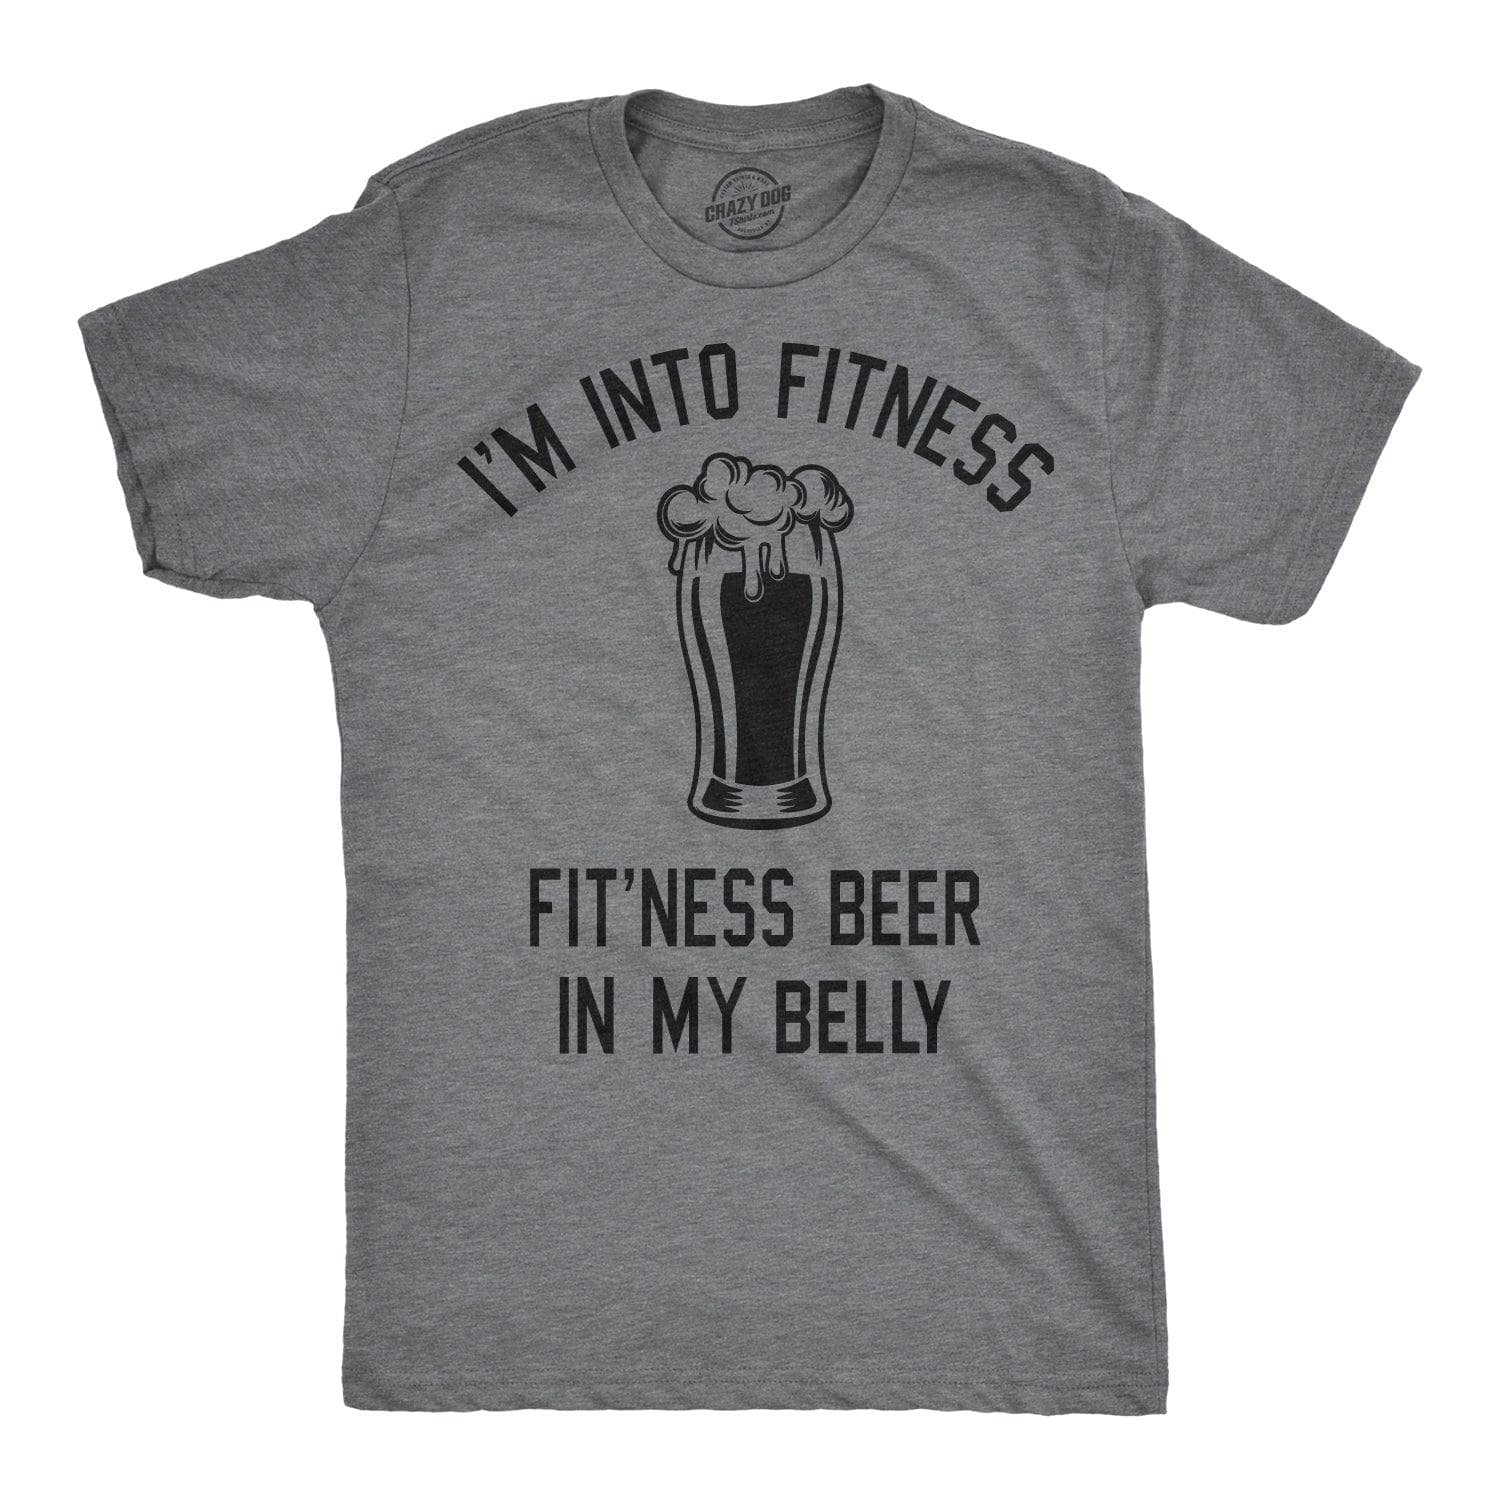 Fitness Beer In My Belly Men's Tshirt  -  Crazy Dog T-Shirts